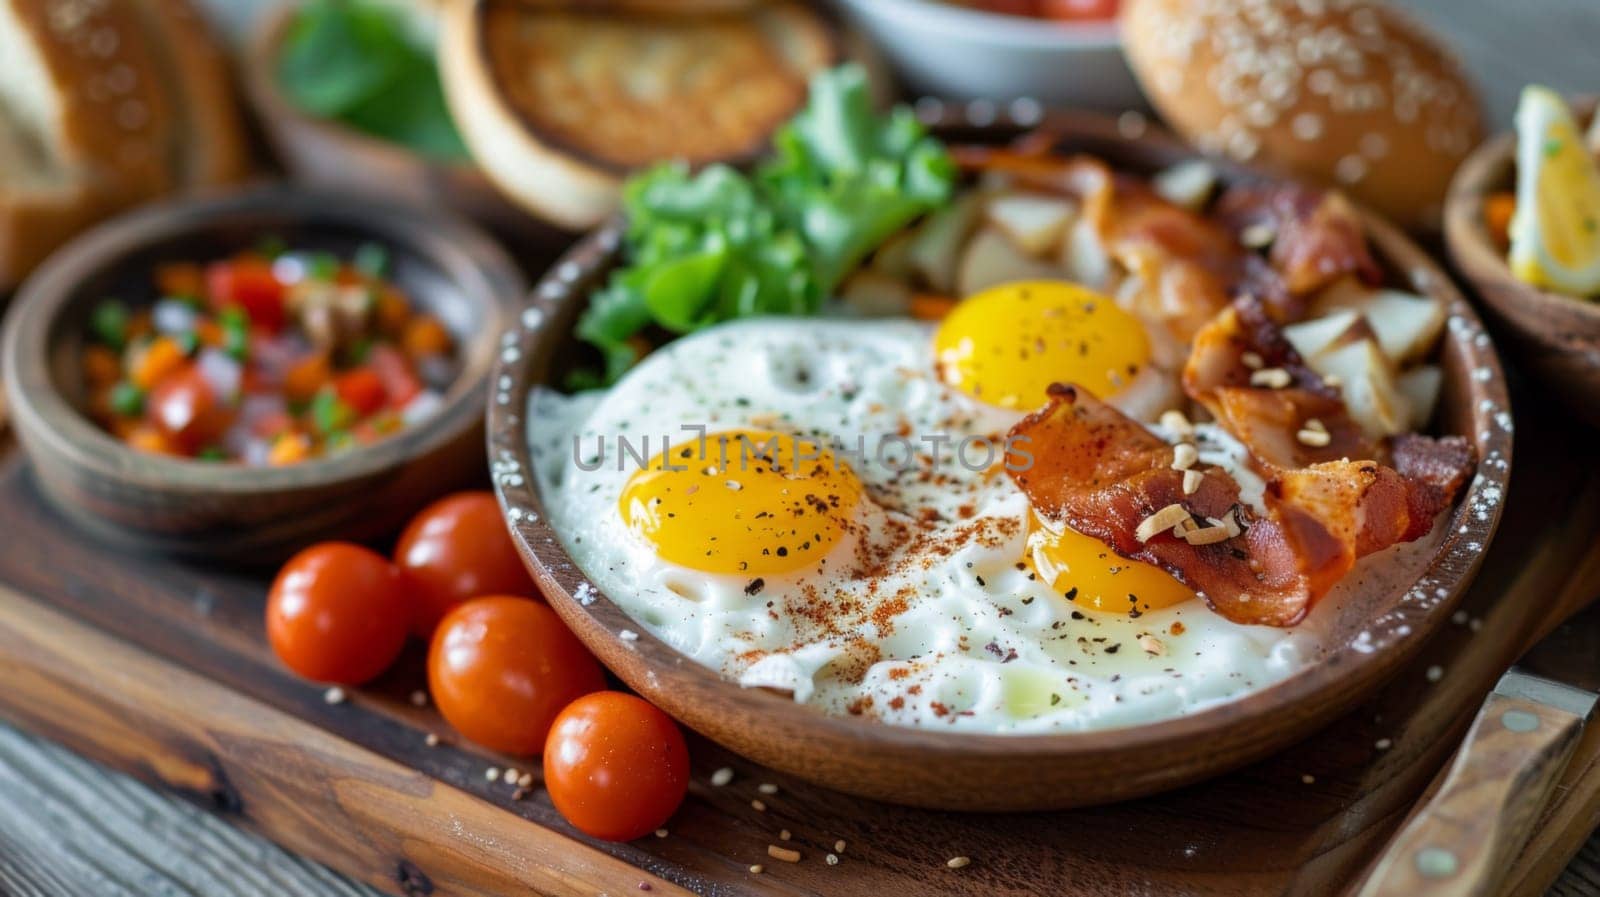 A wooden cutting board topped with a bowl of eggs, tomatoes and bacon, AI by starush